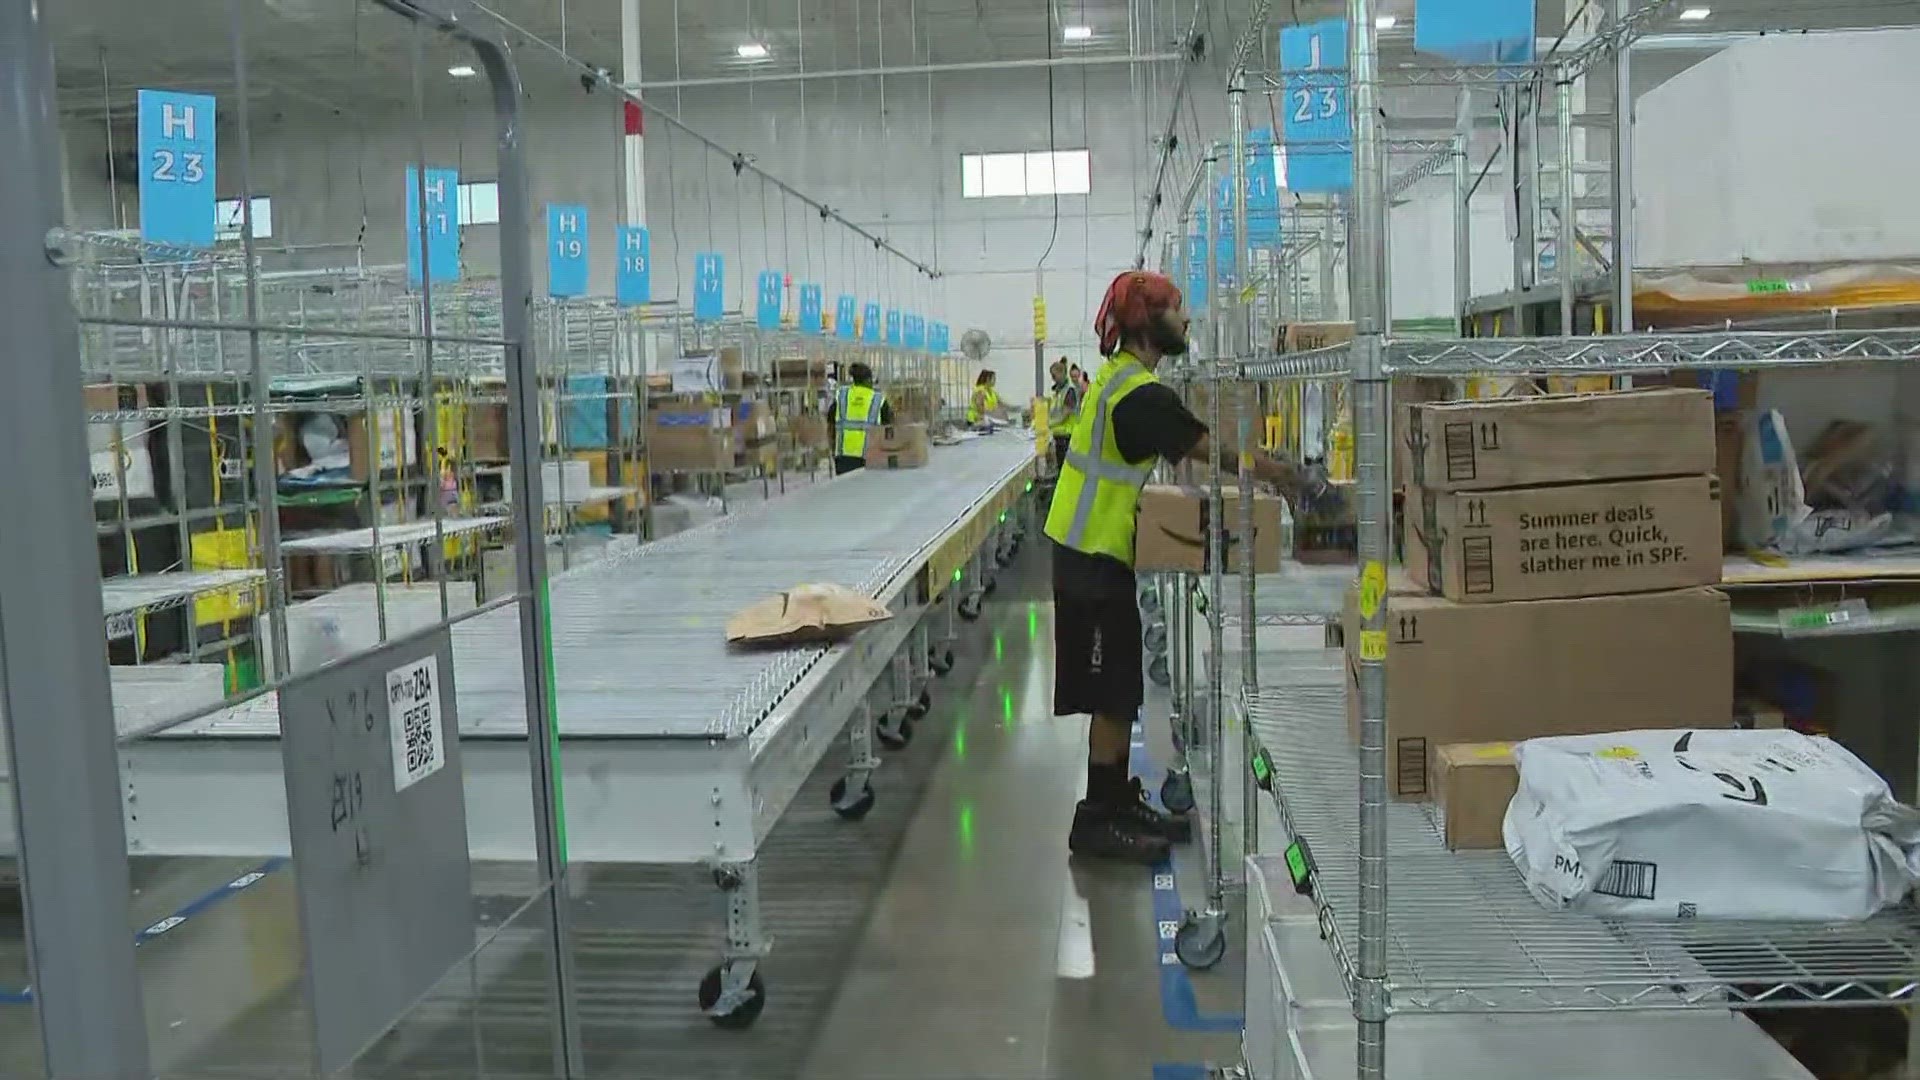 Amazon is dishing out deals for Prime Day. At the Fenton delivery station, workers have been prepping for what the next two days will bring.